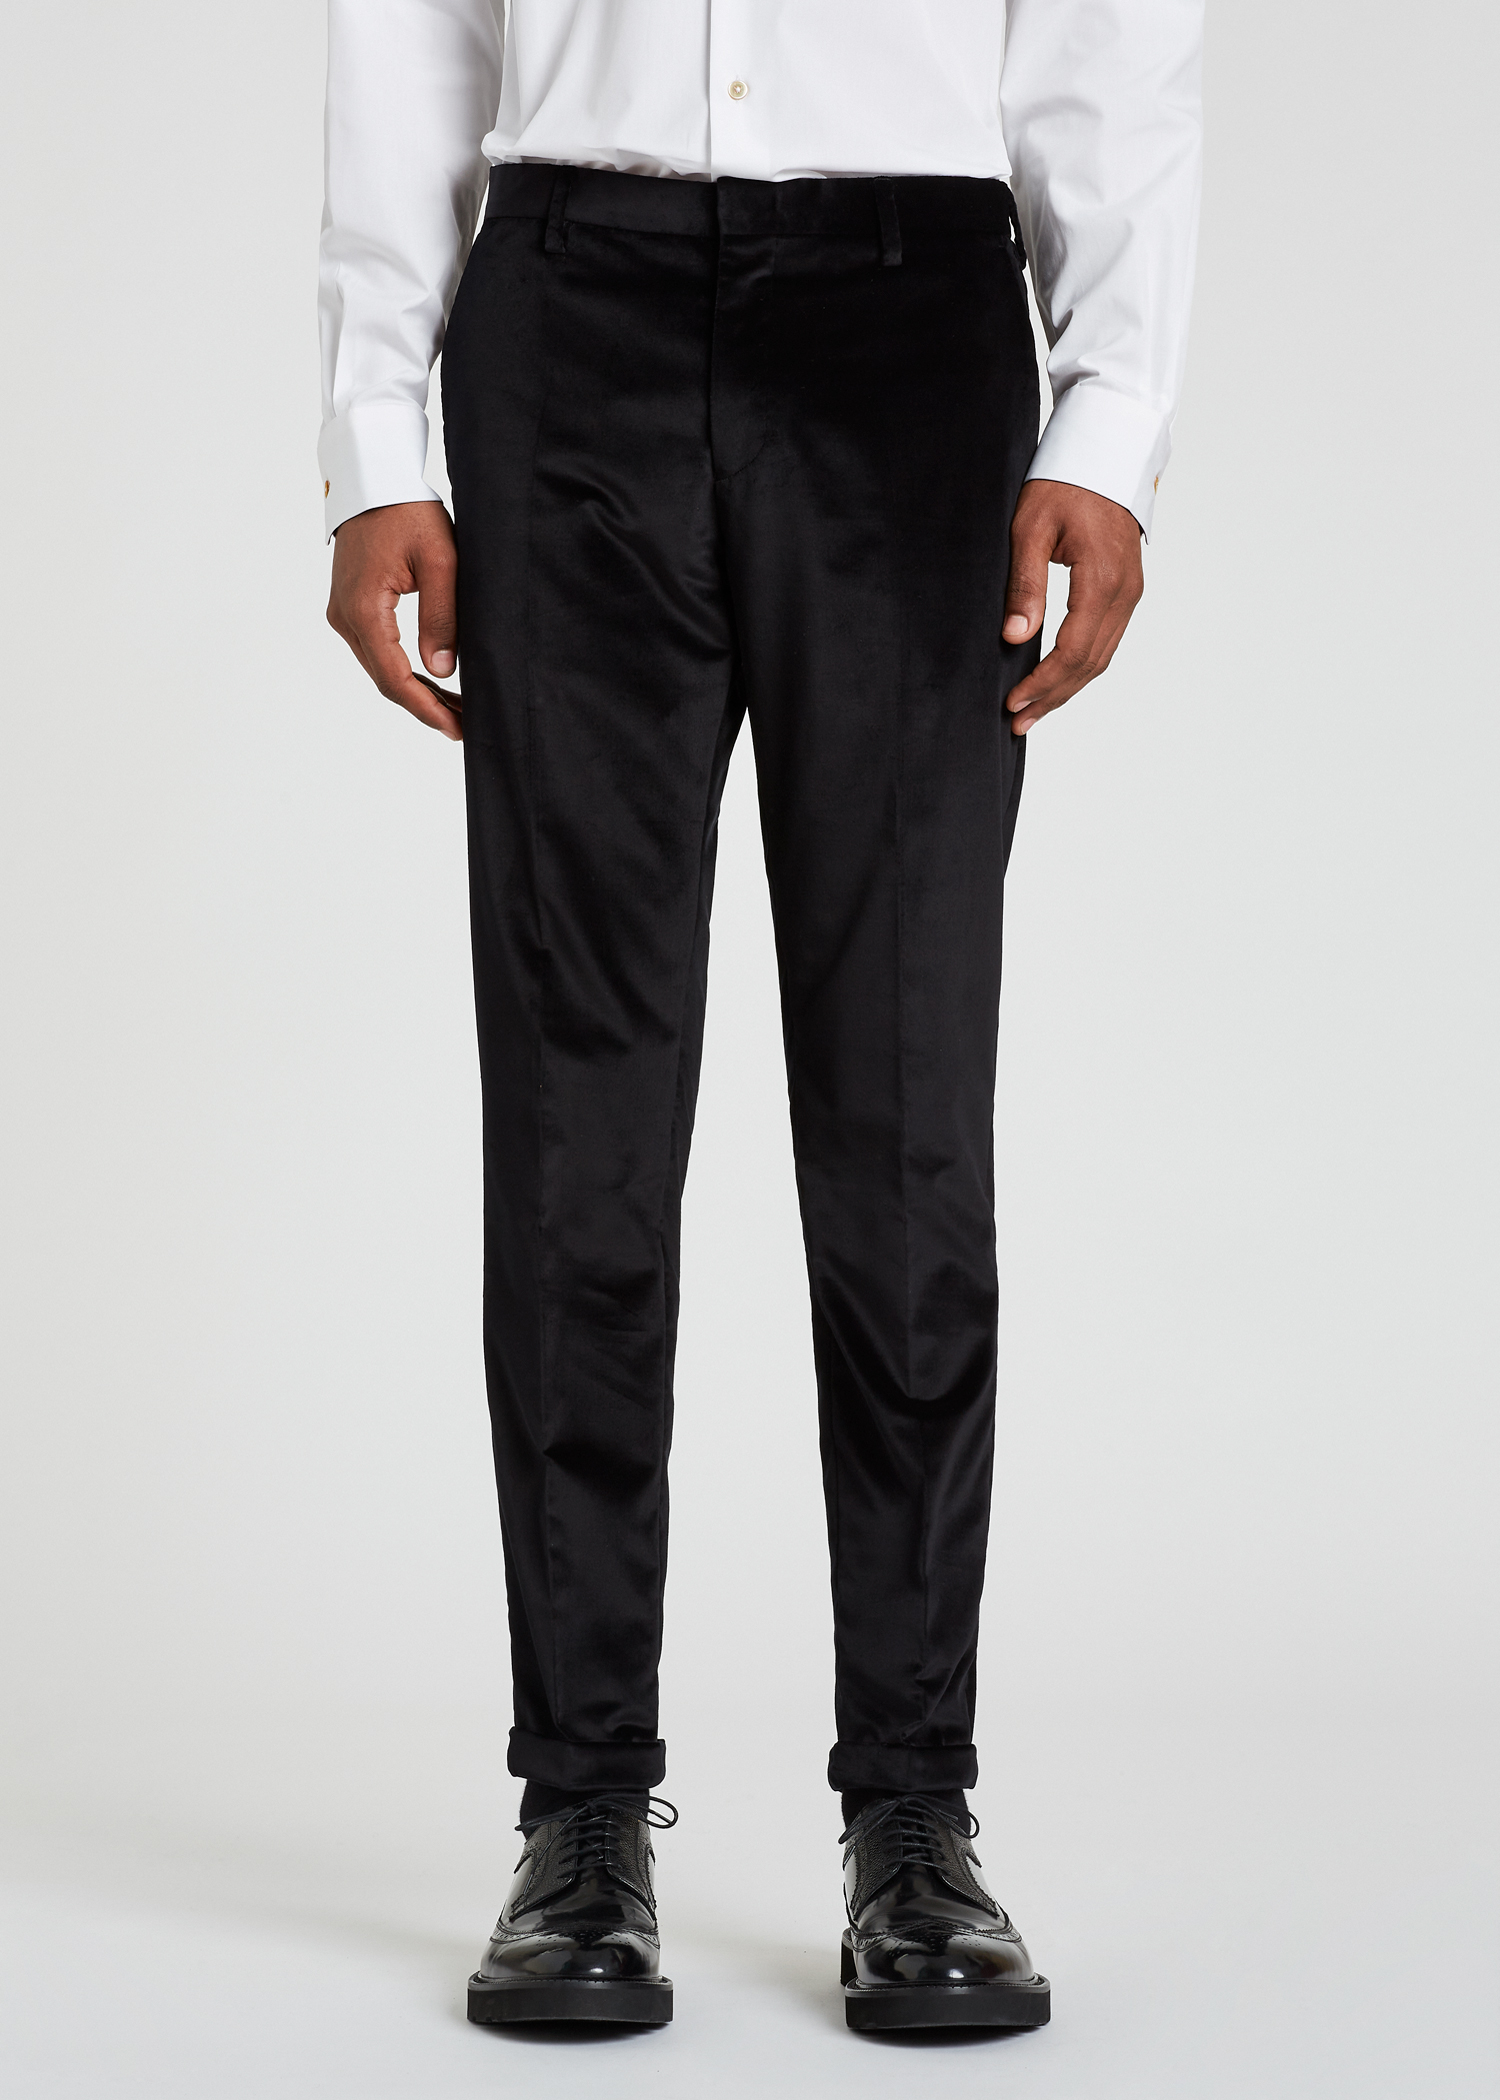 Buy Black Trousers & Pants for Men by CODE BY LIFESTYLE Online | Ajio.com-saigonsouth.com.vn